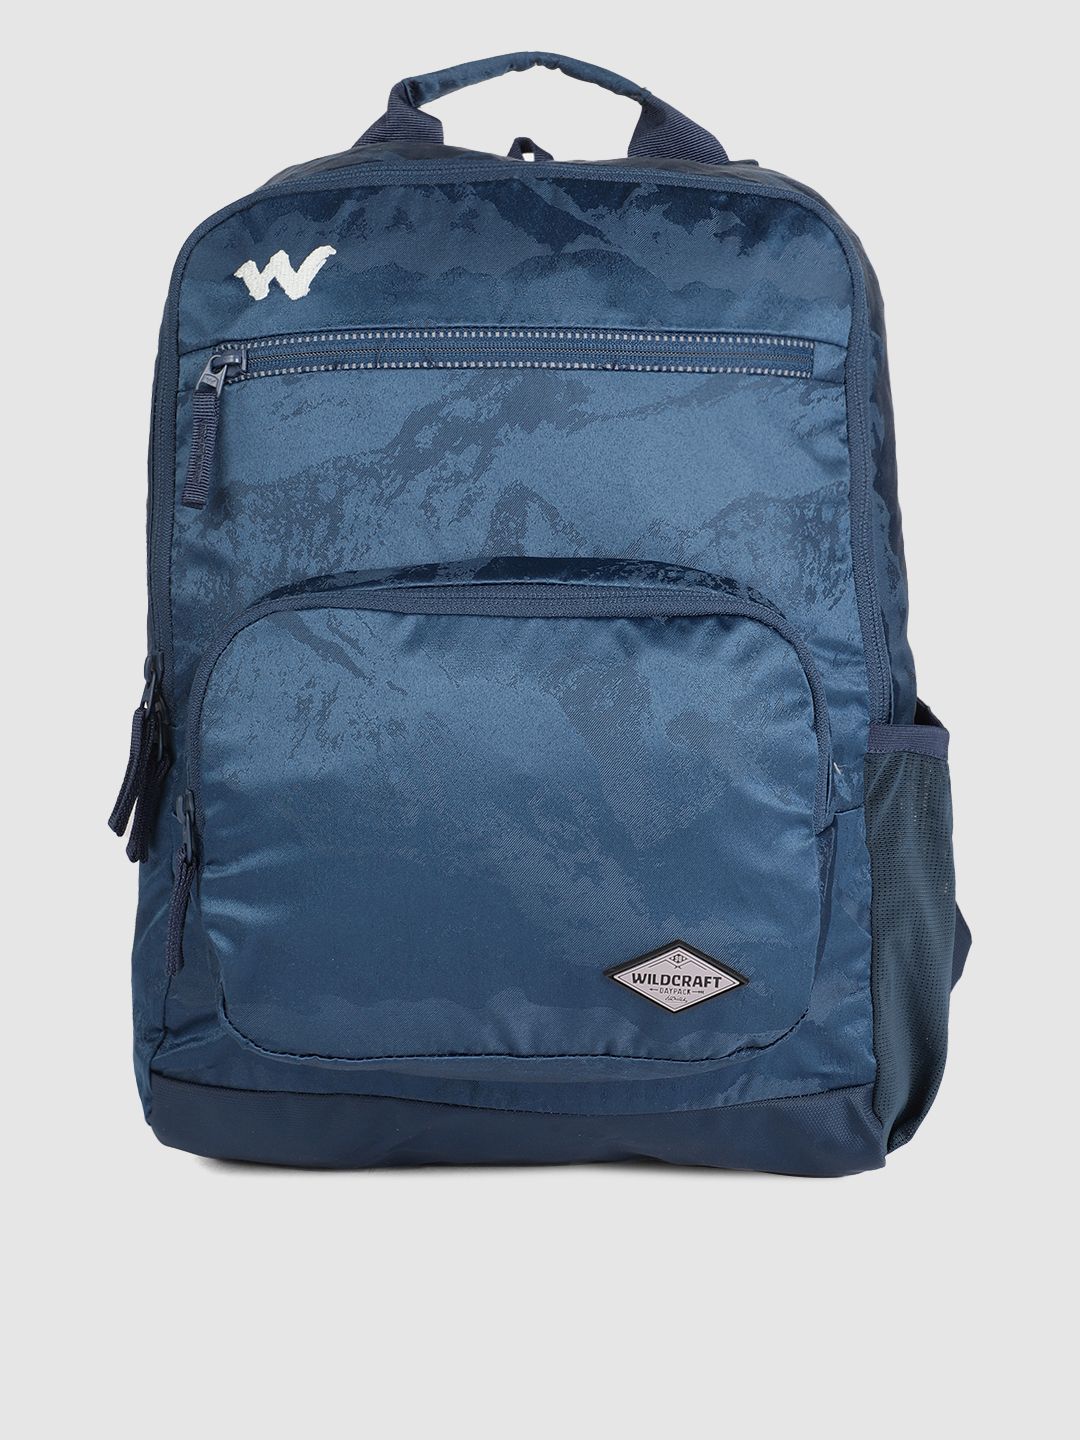 Wildcraft Unisex Blue Evo Solid Backpack Price in India